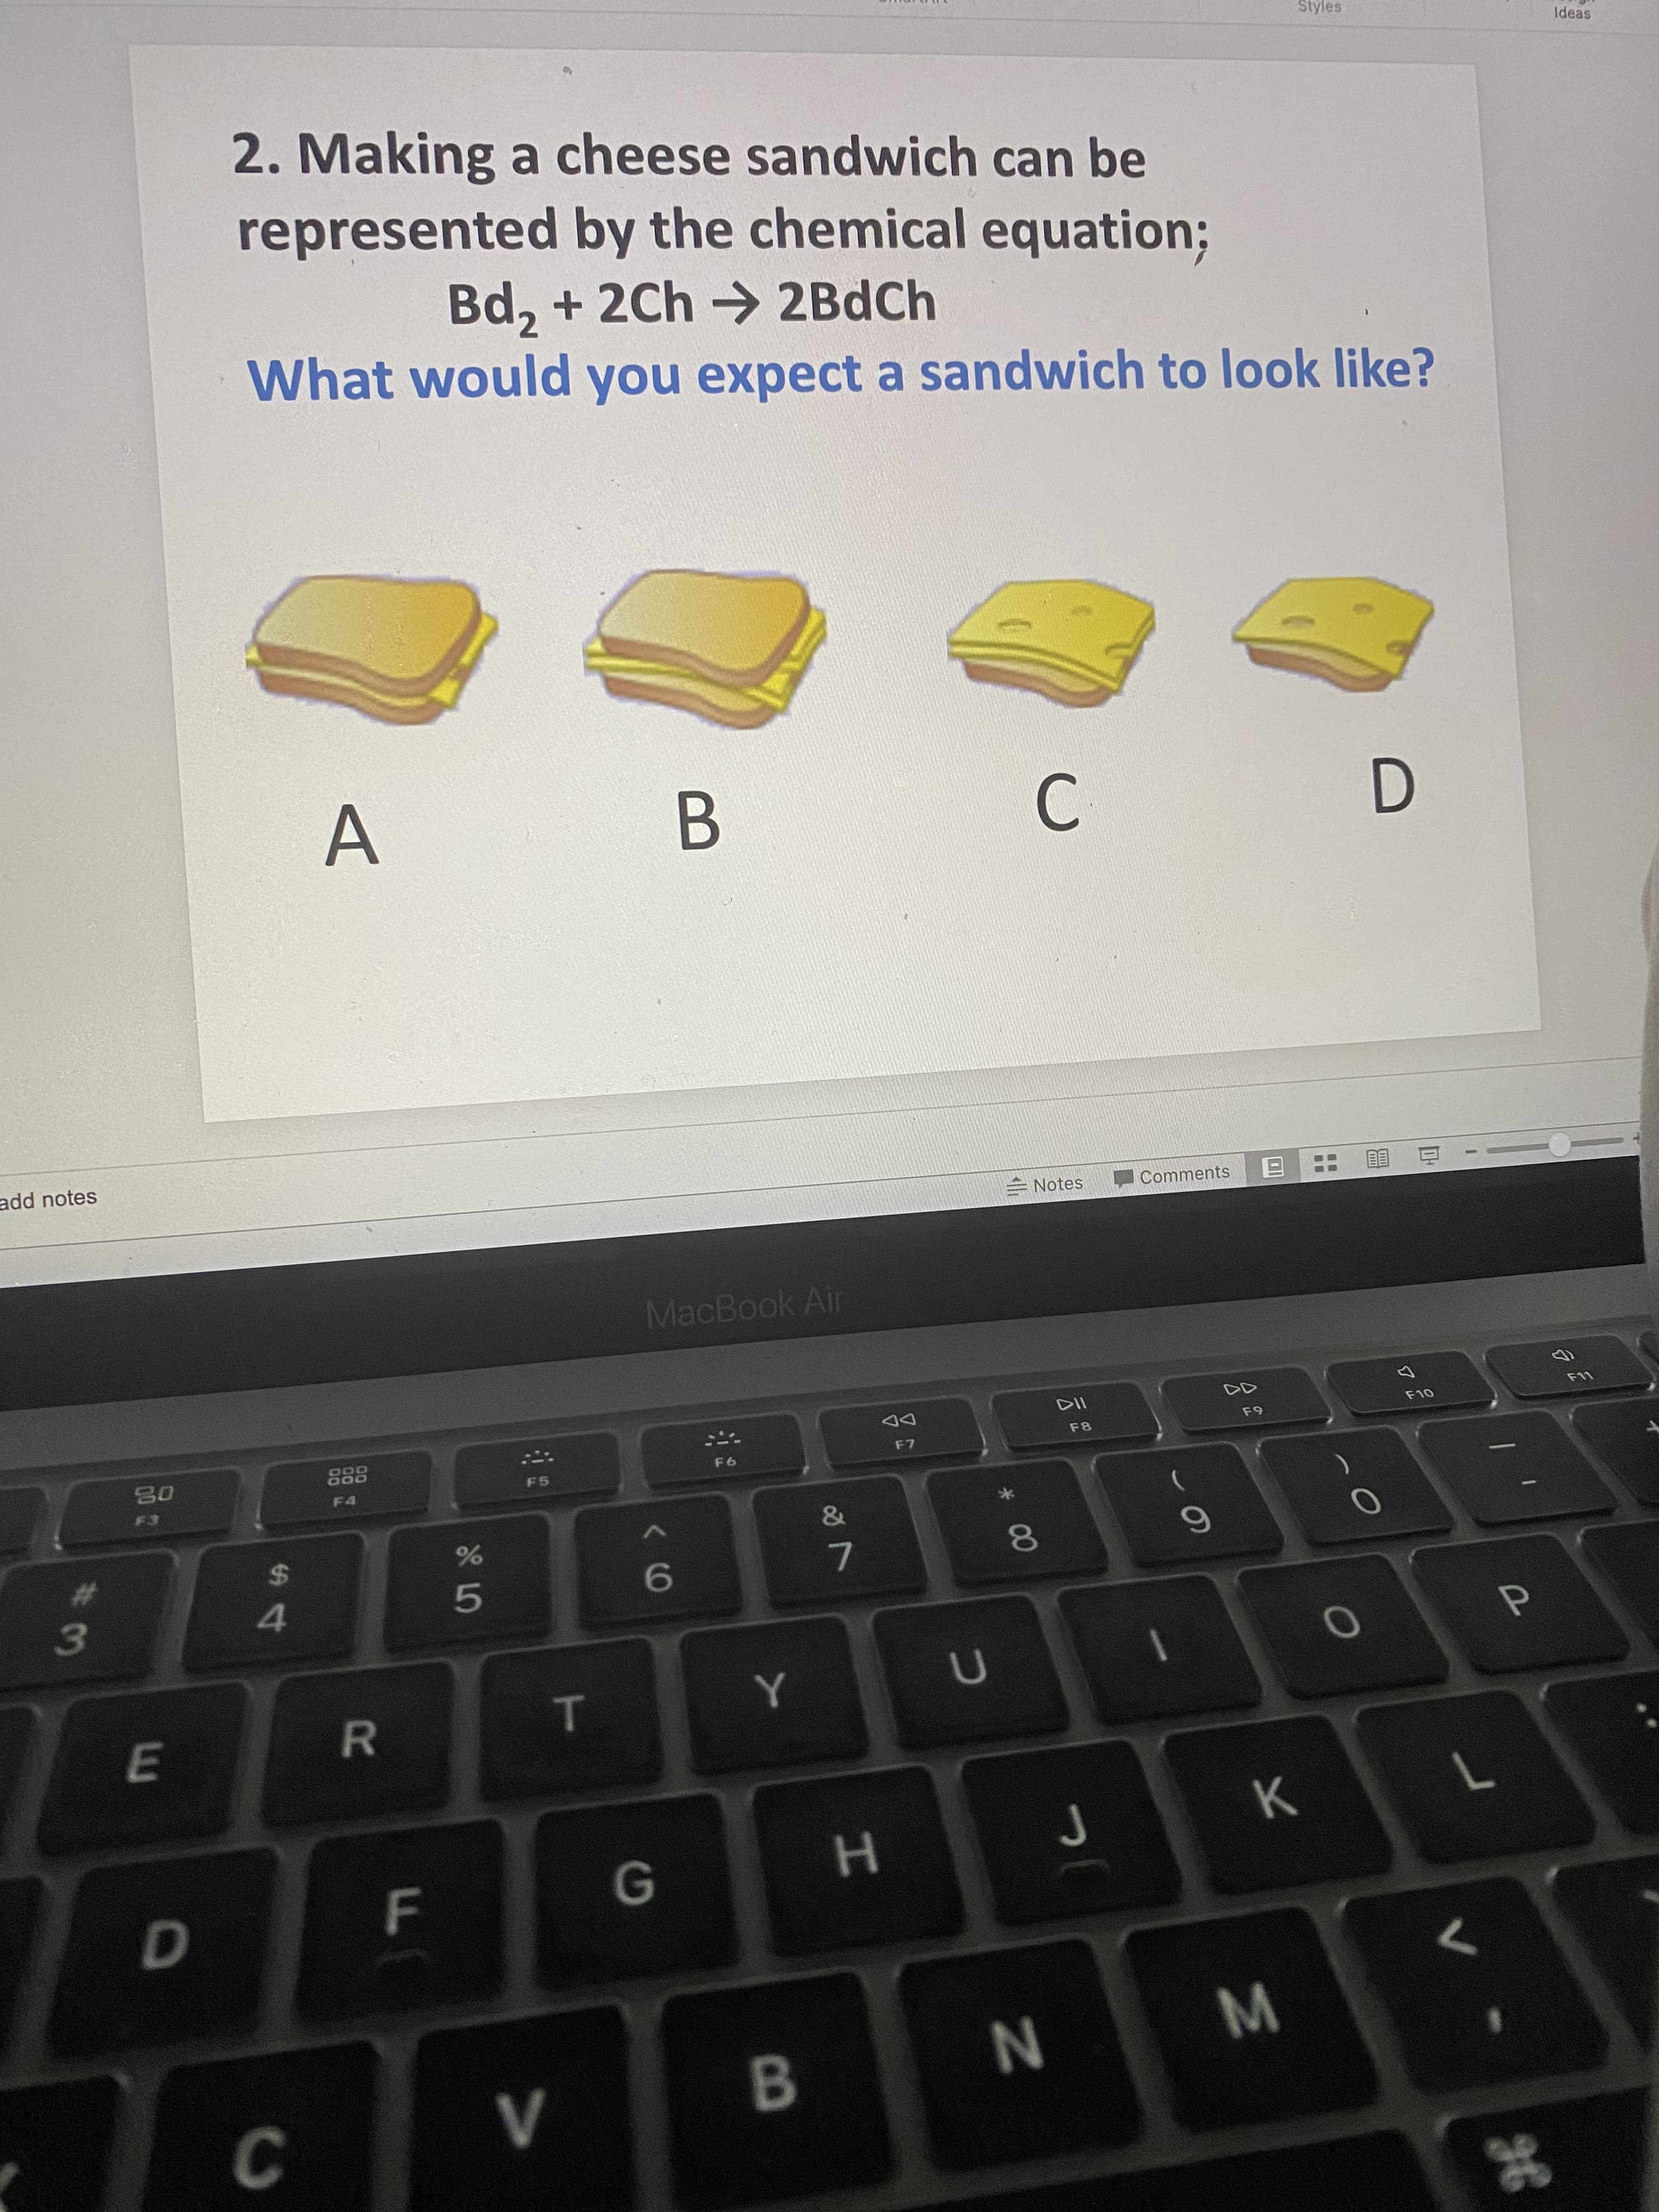 2. Making a cheese sandwich can be
represented by the chemical equation%;
Bd, + 2Ch > 2BdCh
What would you expect a sandwich to look like?
C
A
